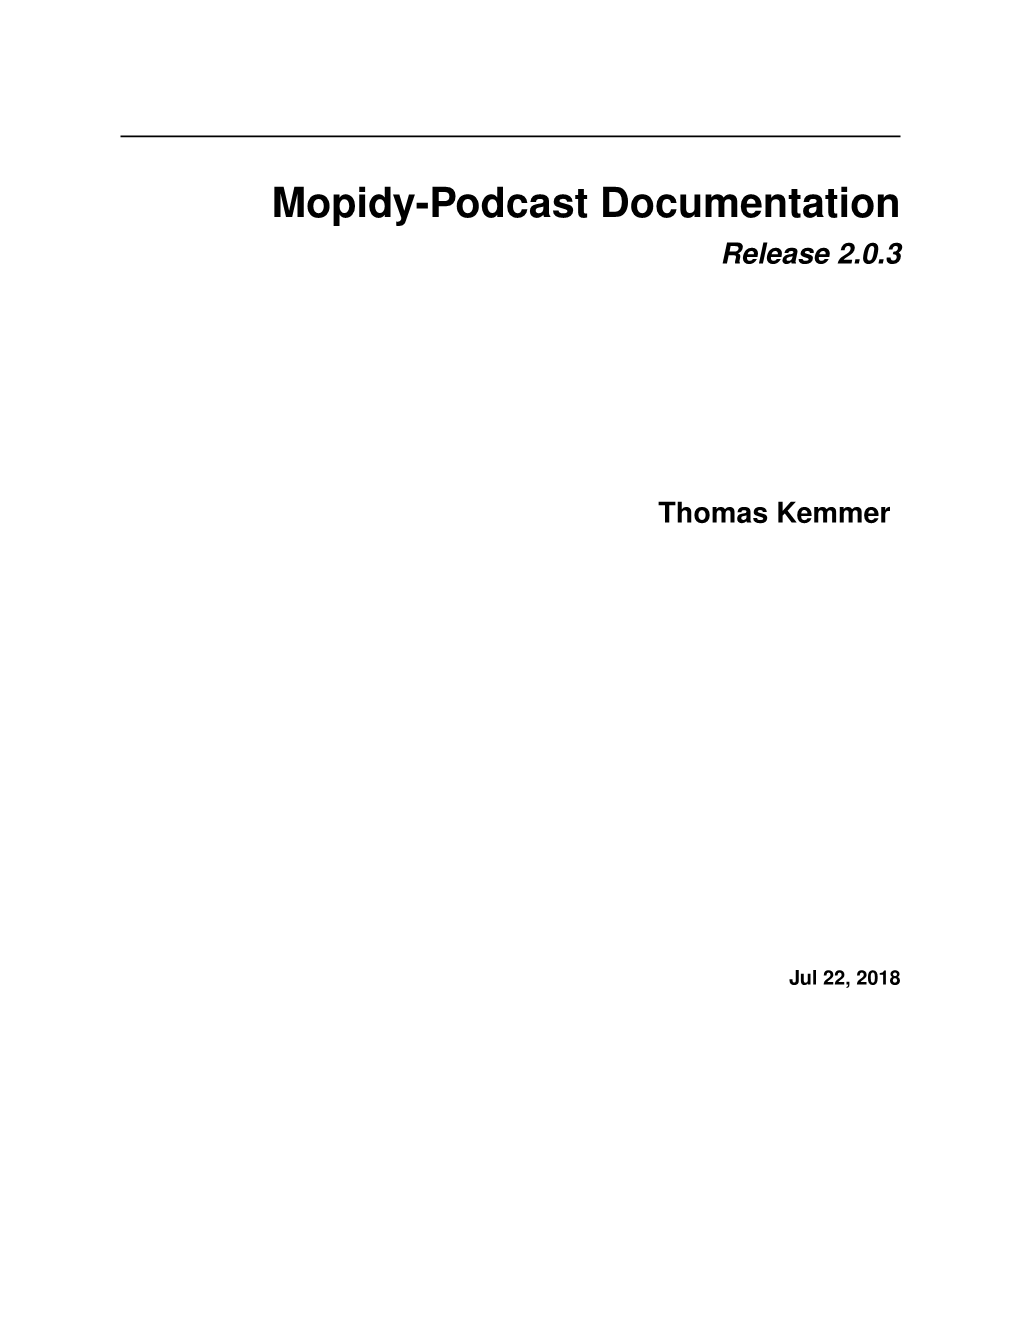 Mopidy-Podcast Documentation Release 2.0.3